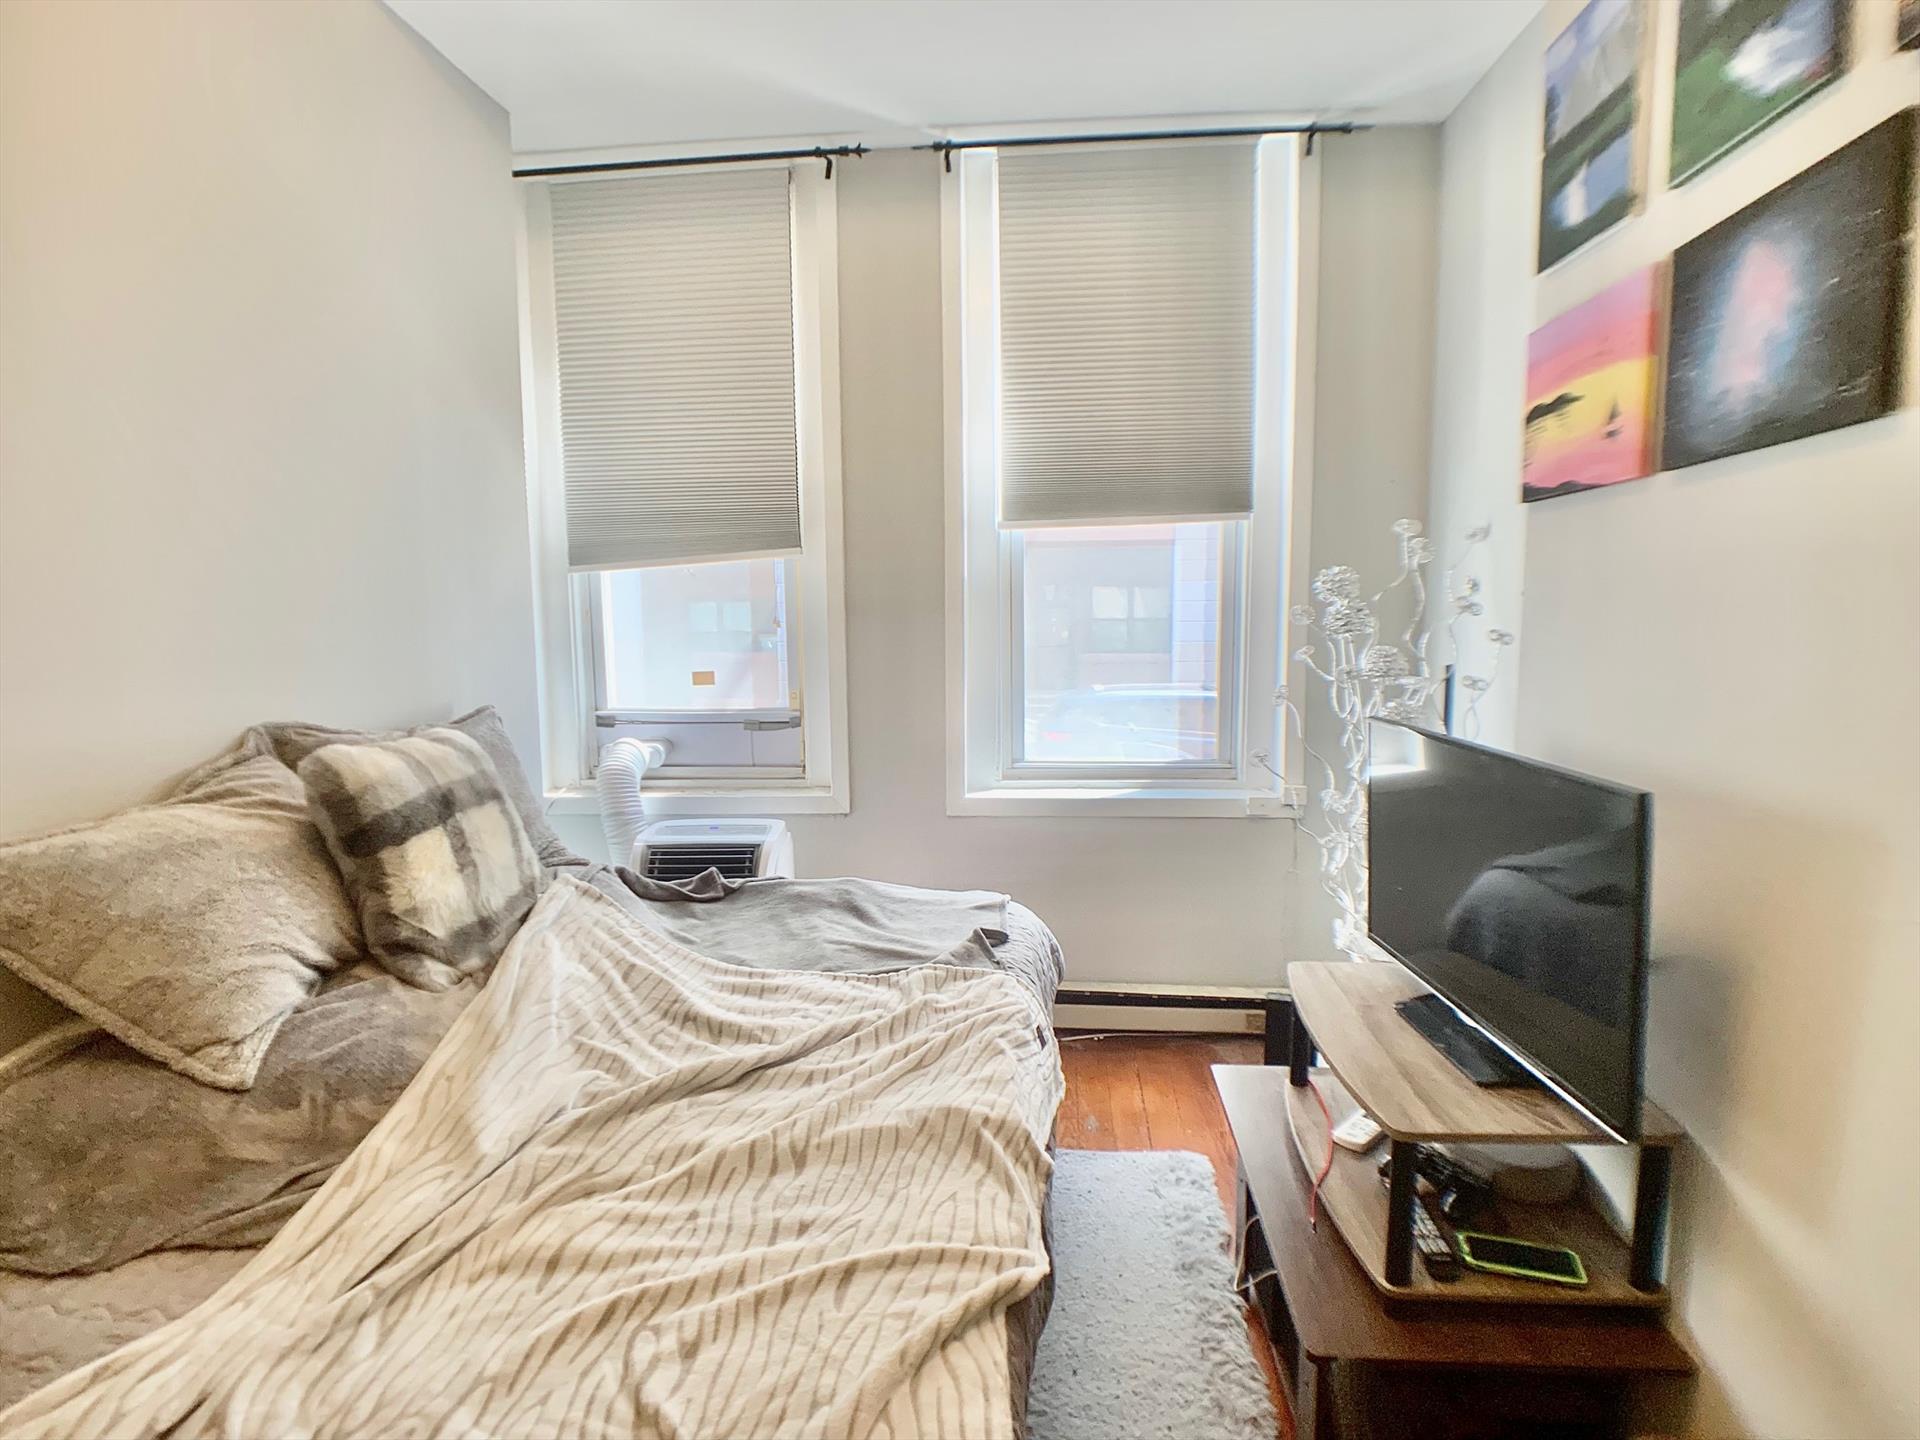 Great priced studio located on 3rd and Jefferson St - Newer Appliances, tiled floors, Washer/Dryer in the building and hot water included. Prime Hoboken location near shops, dining, entertainment, night life, train, path, bus, and more! - Won't last!